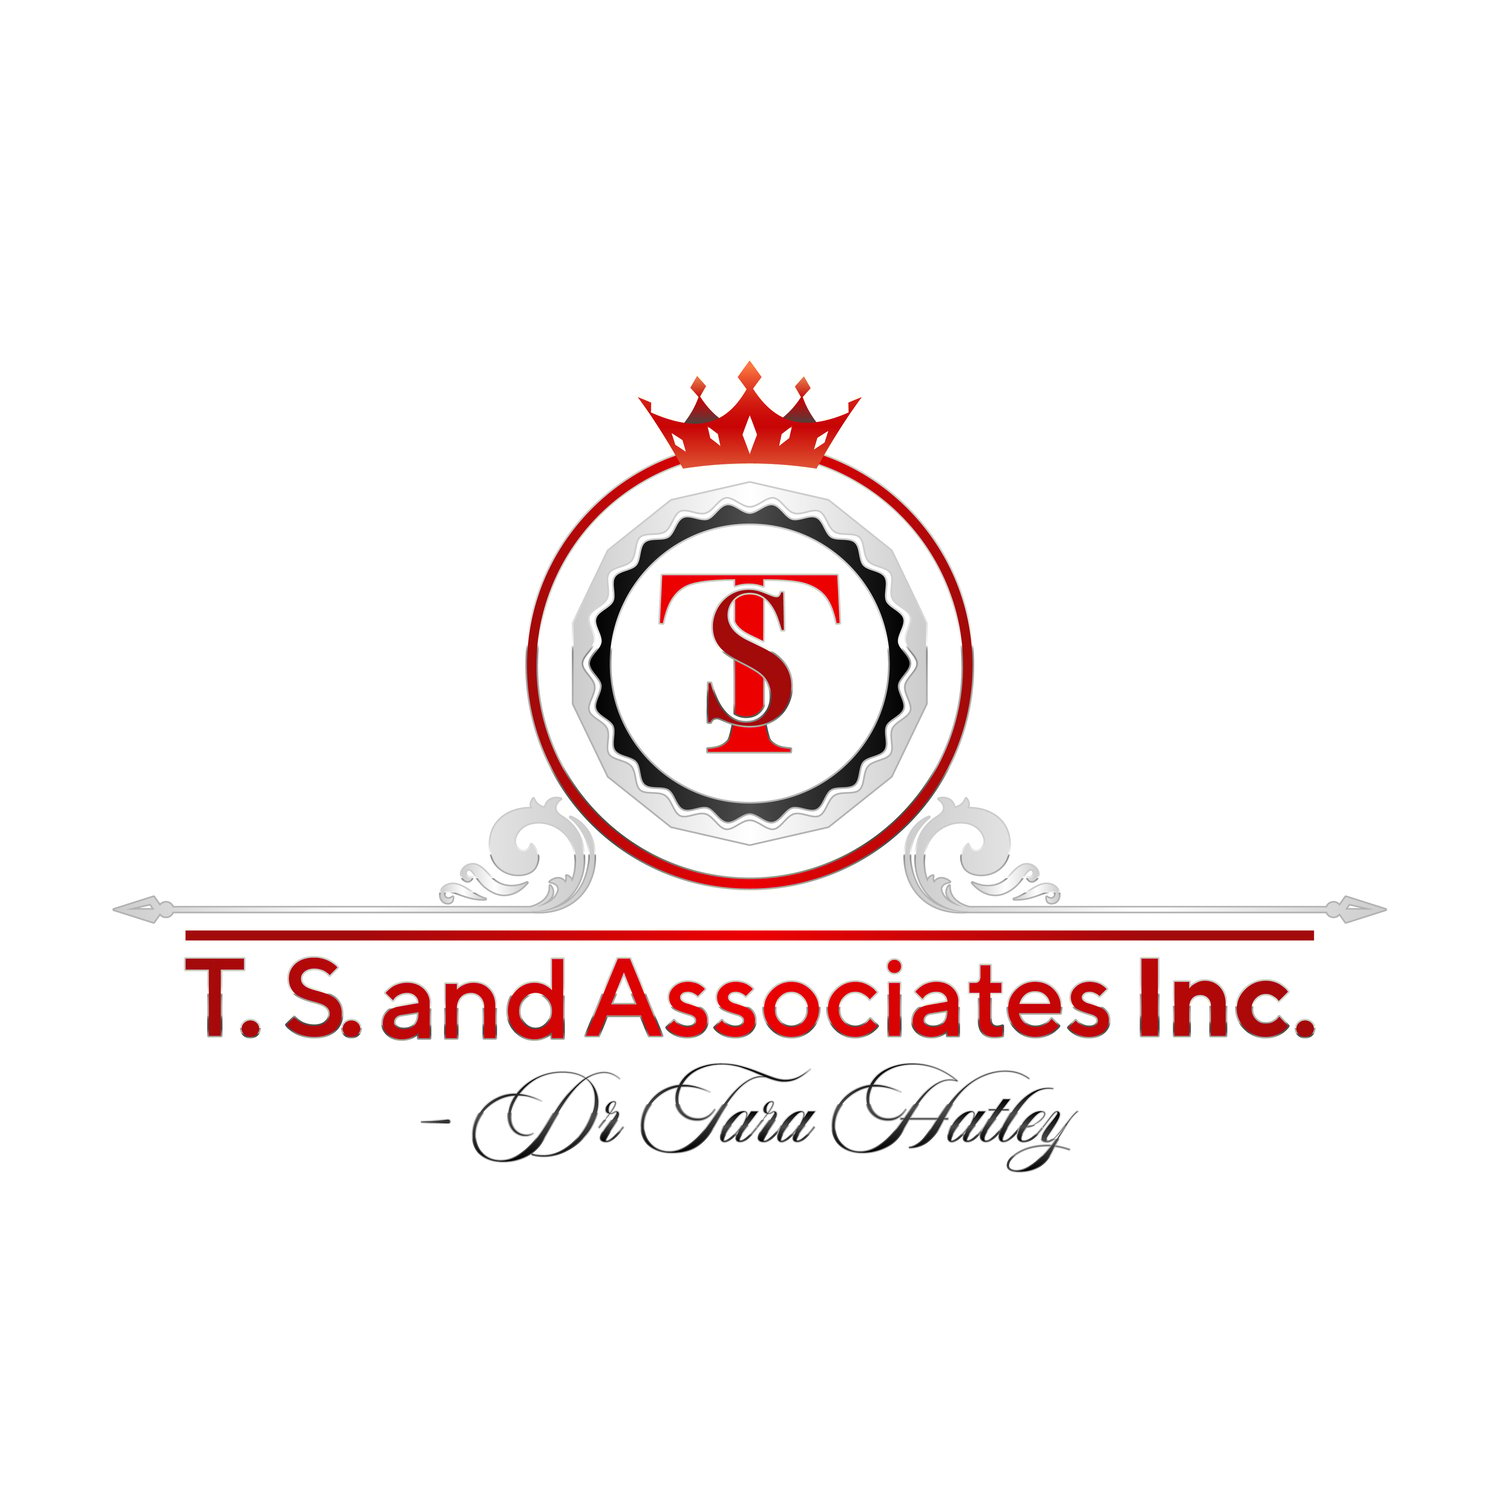 T. S. and Associates